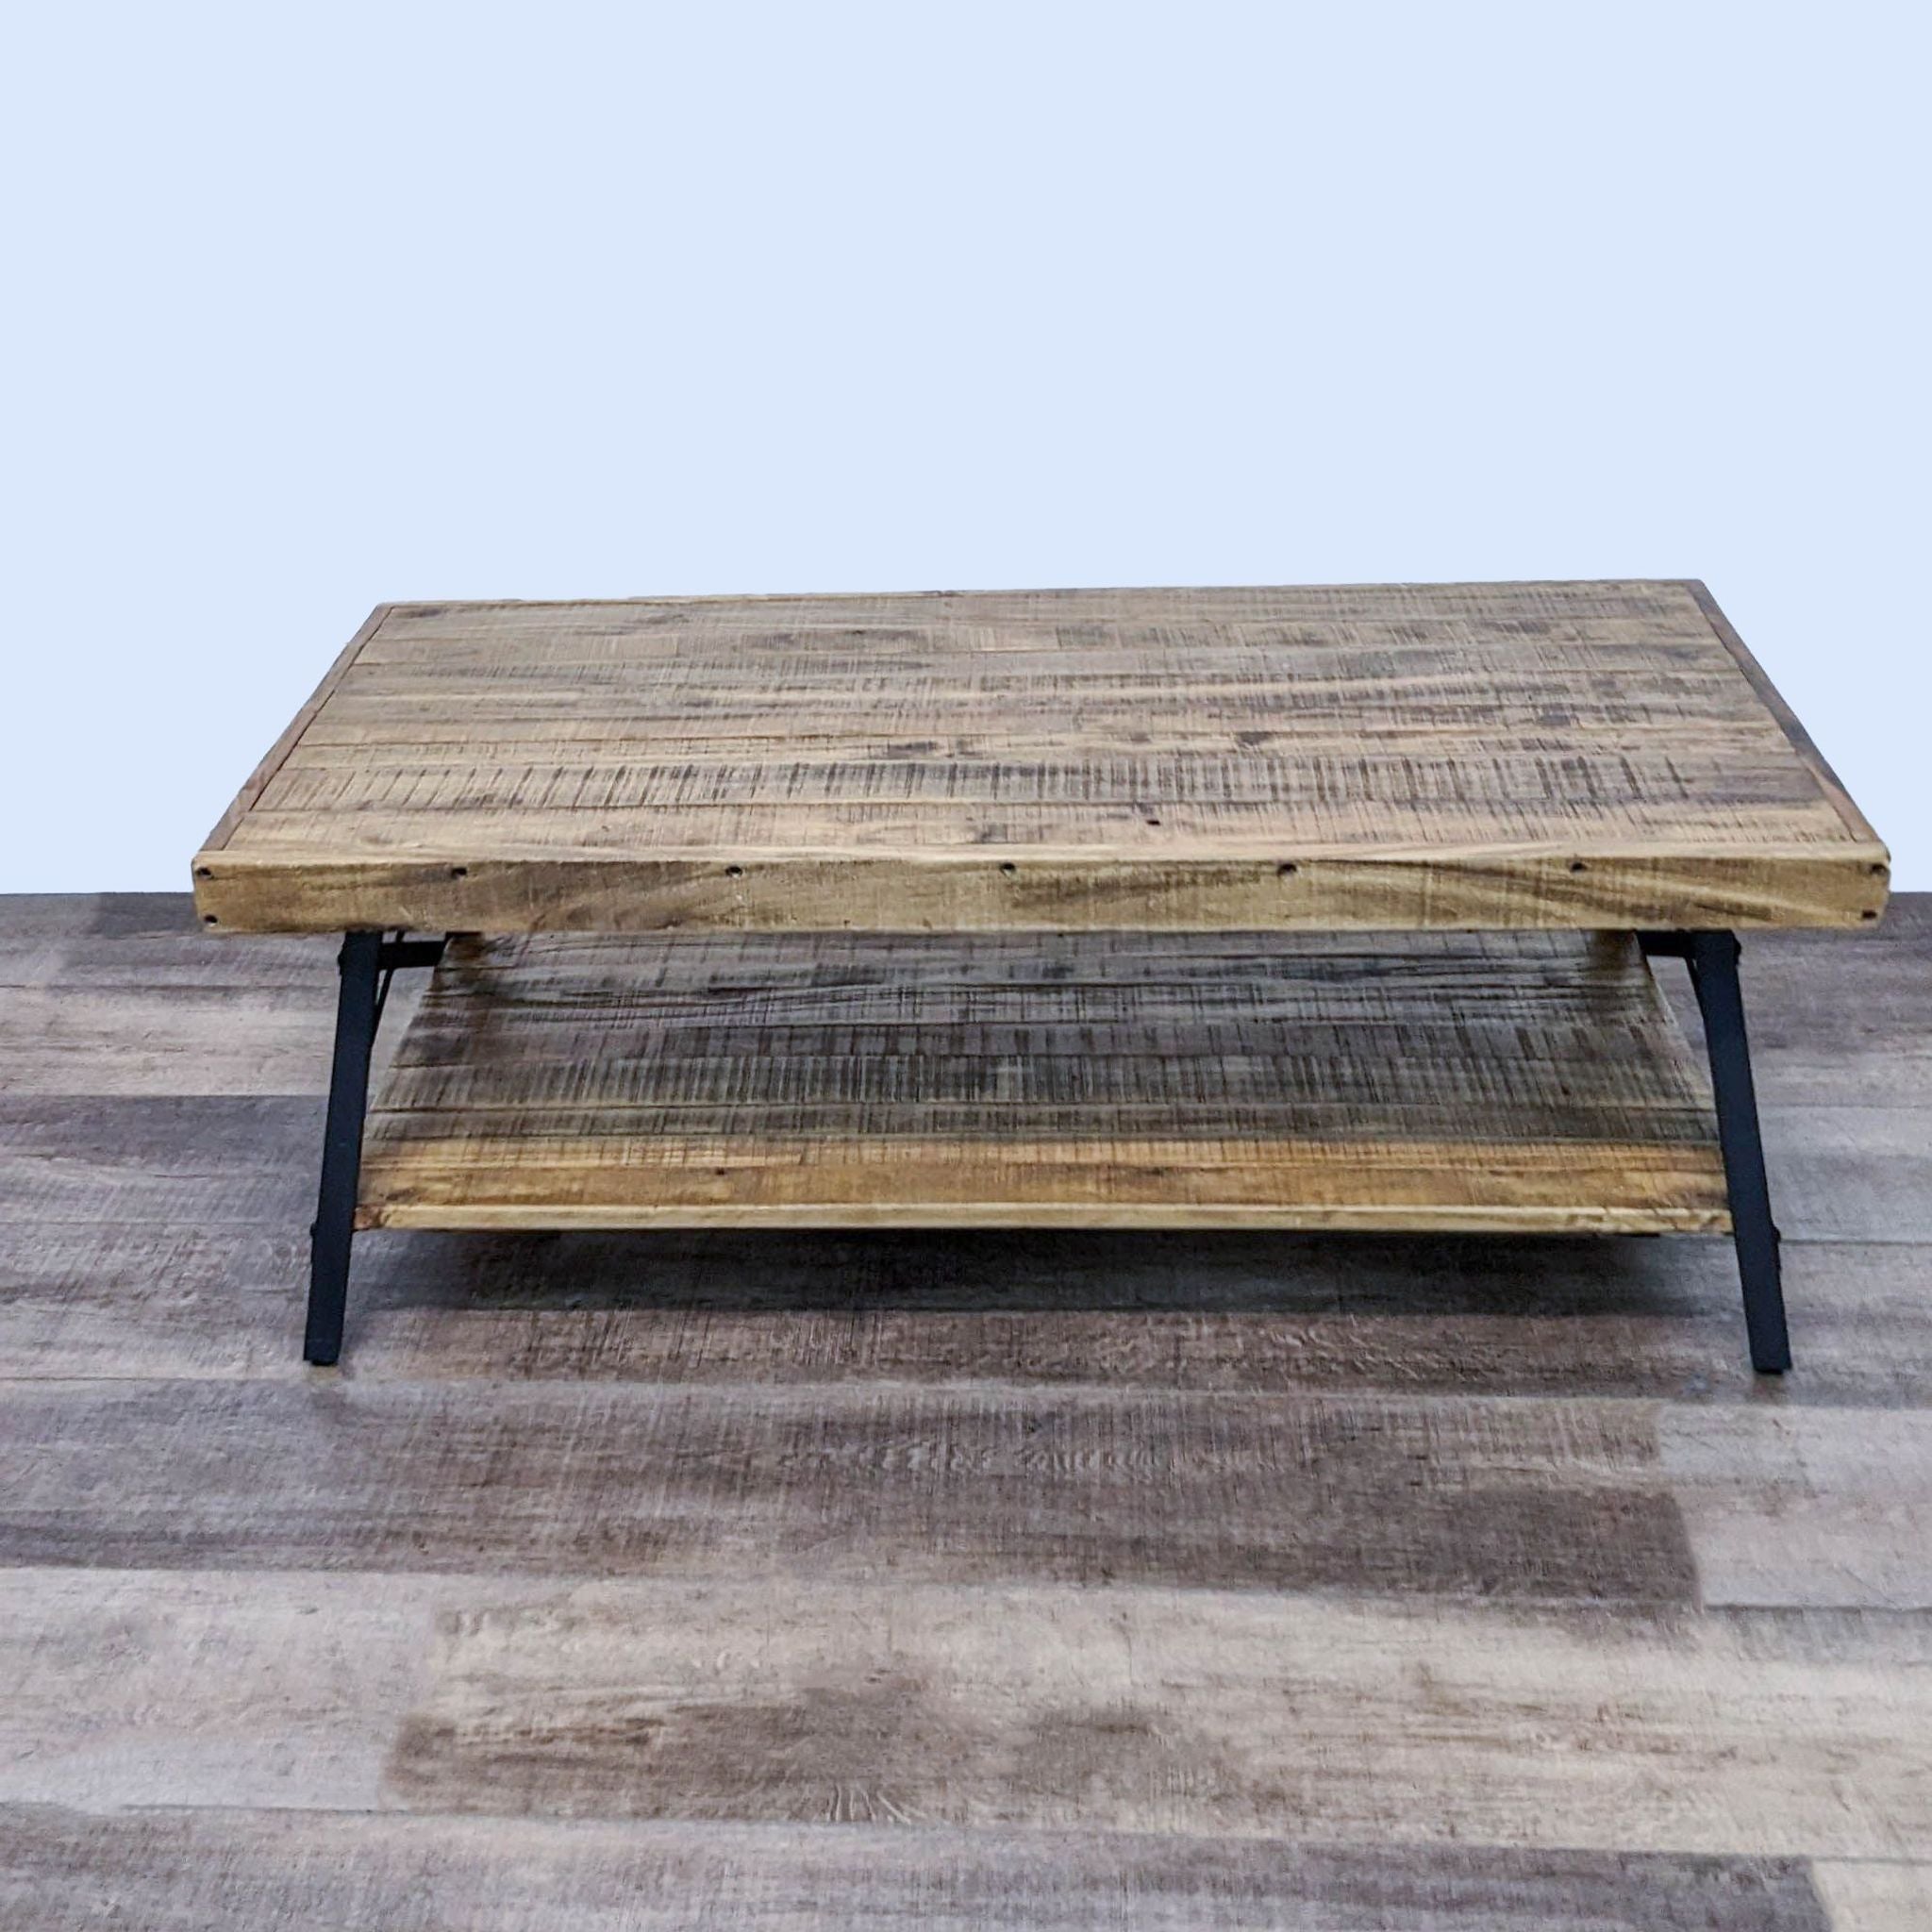 Planked wooden BoConcept coffee table featuring a lower shelf and sturdy metal bracing on a textured floor.